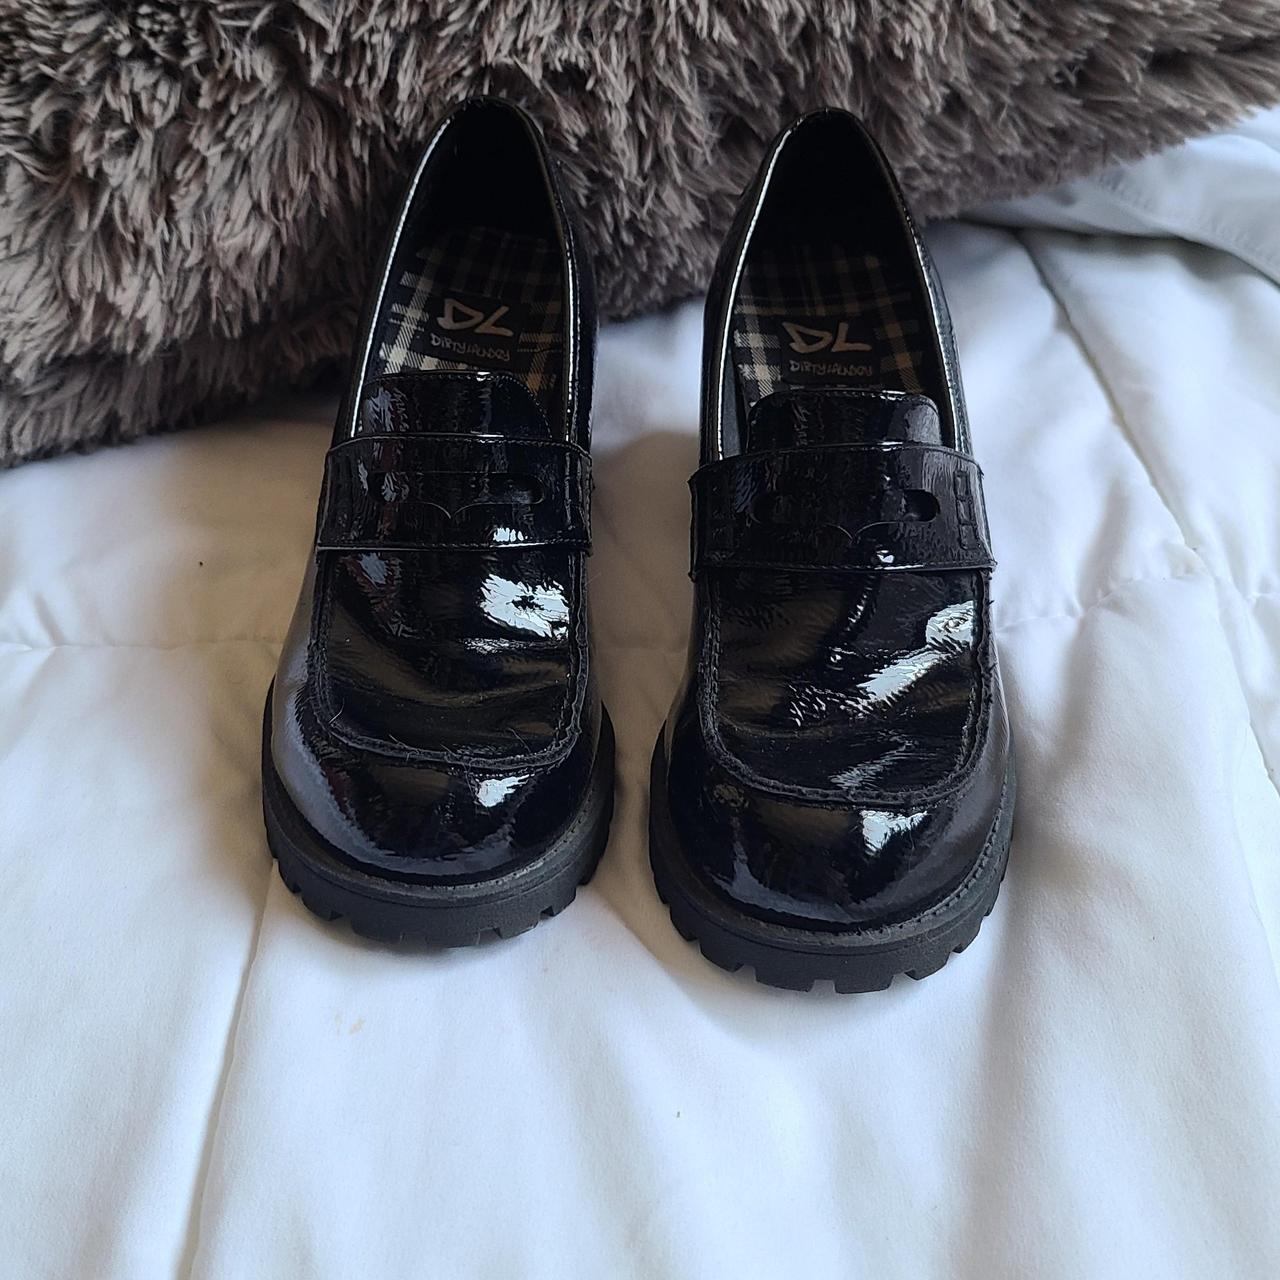 Dirty Laundry Women's Black Loafers (2)